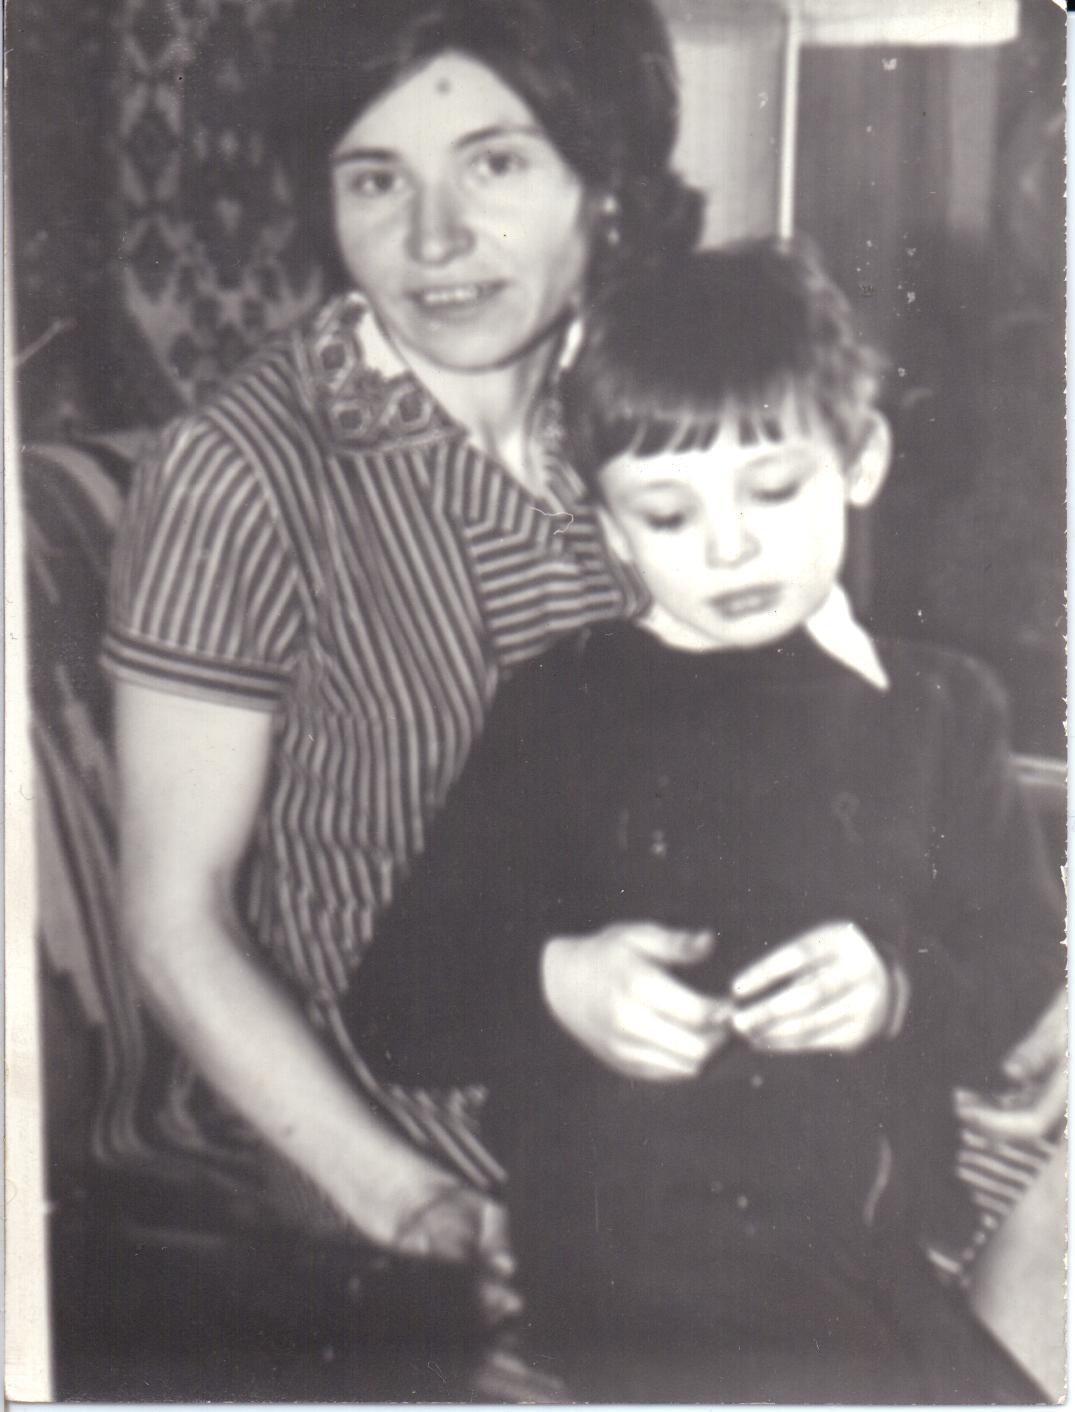 Nadiya Svitlychna with her son Yarema after her release, wearing the dress with the embroidered collar, 1976.